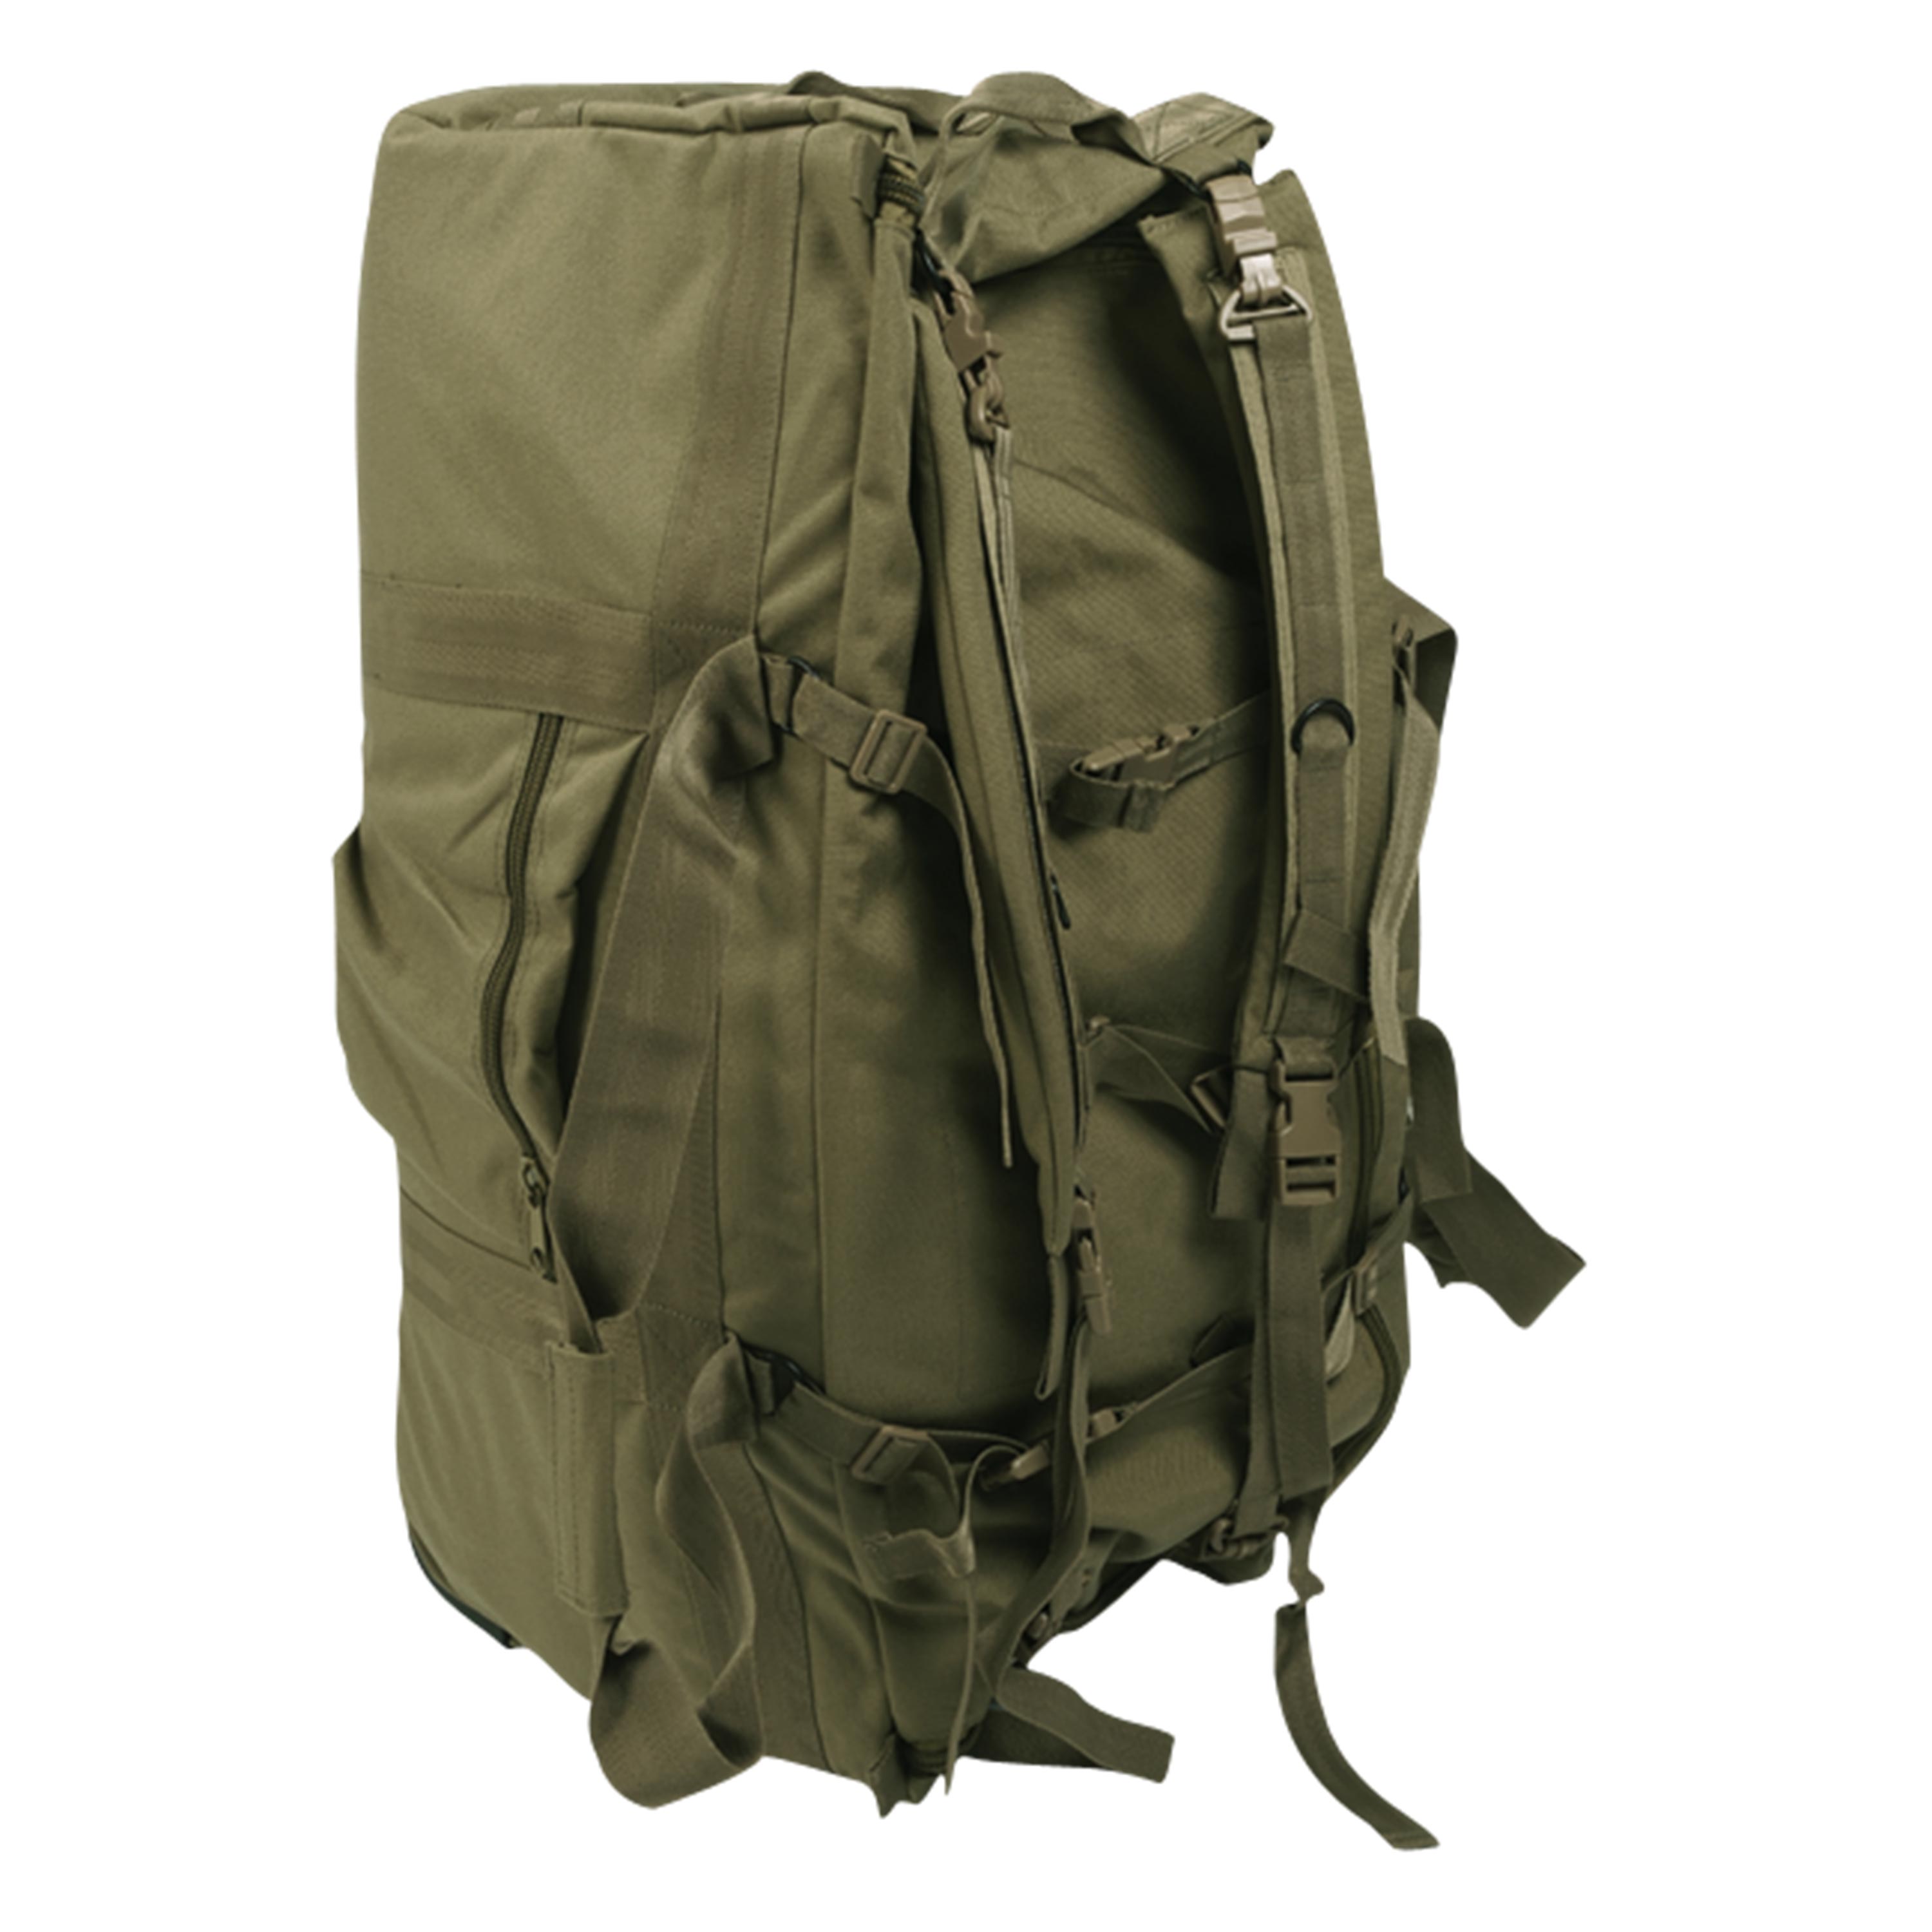 Mil-Tec Tactical Cargo Bag with Wheels olive | Mil-Tec Tactical Cargo ...